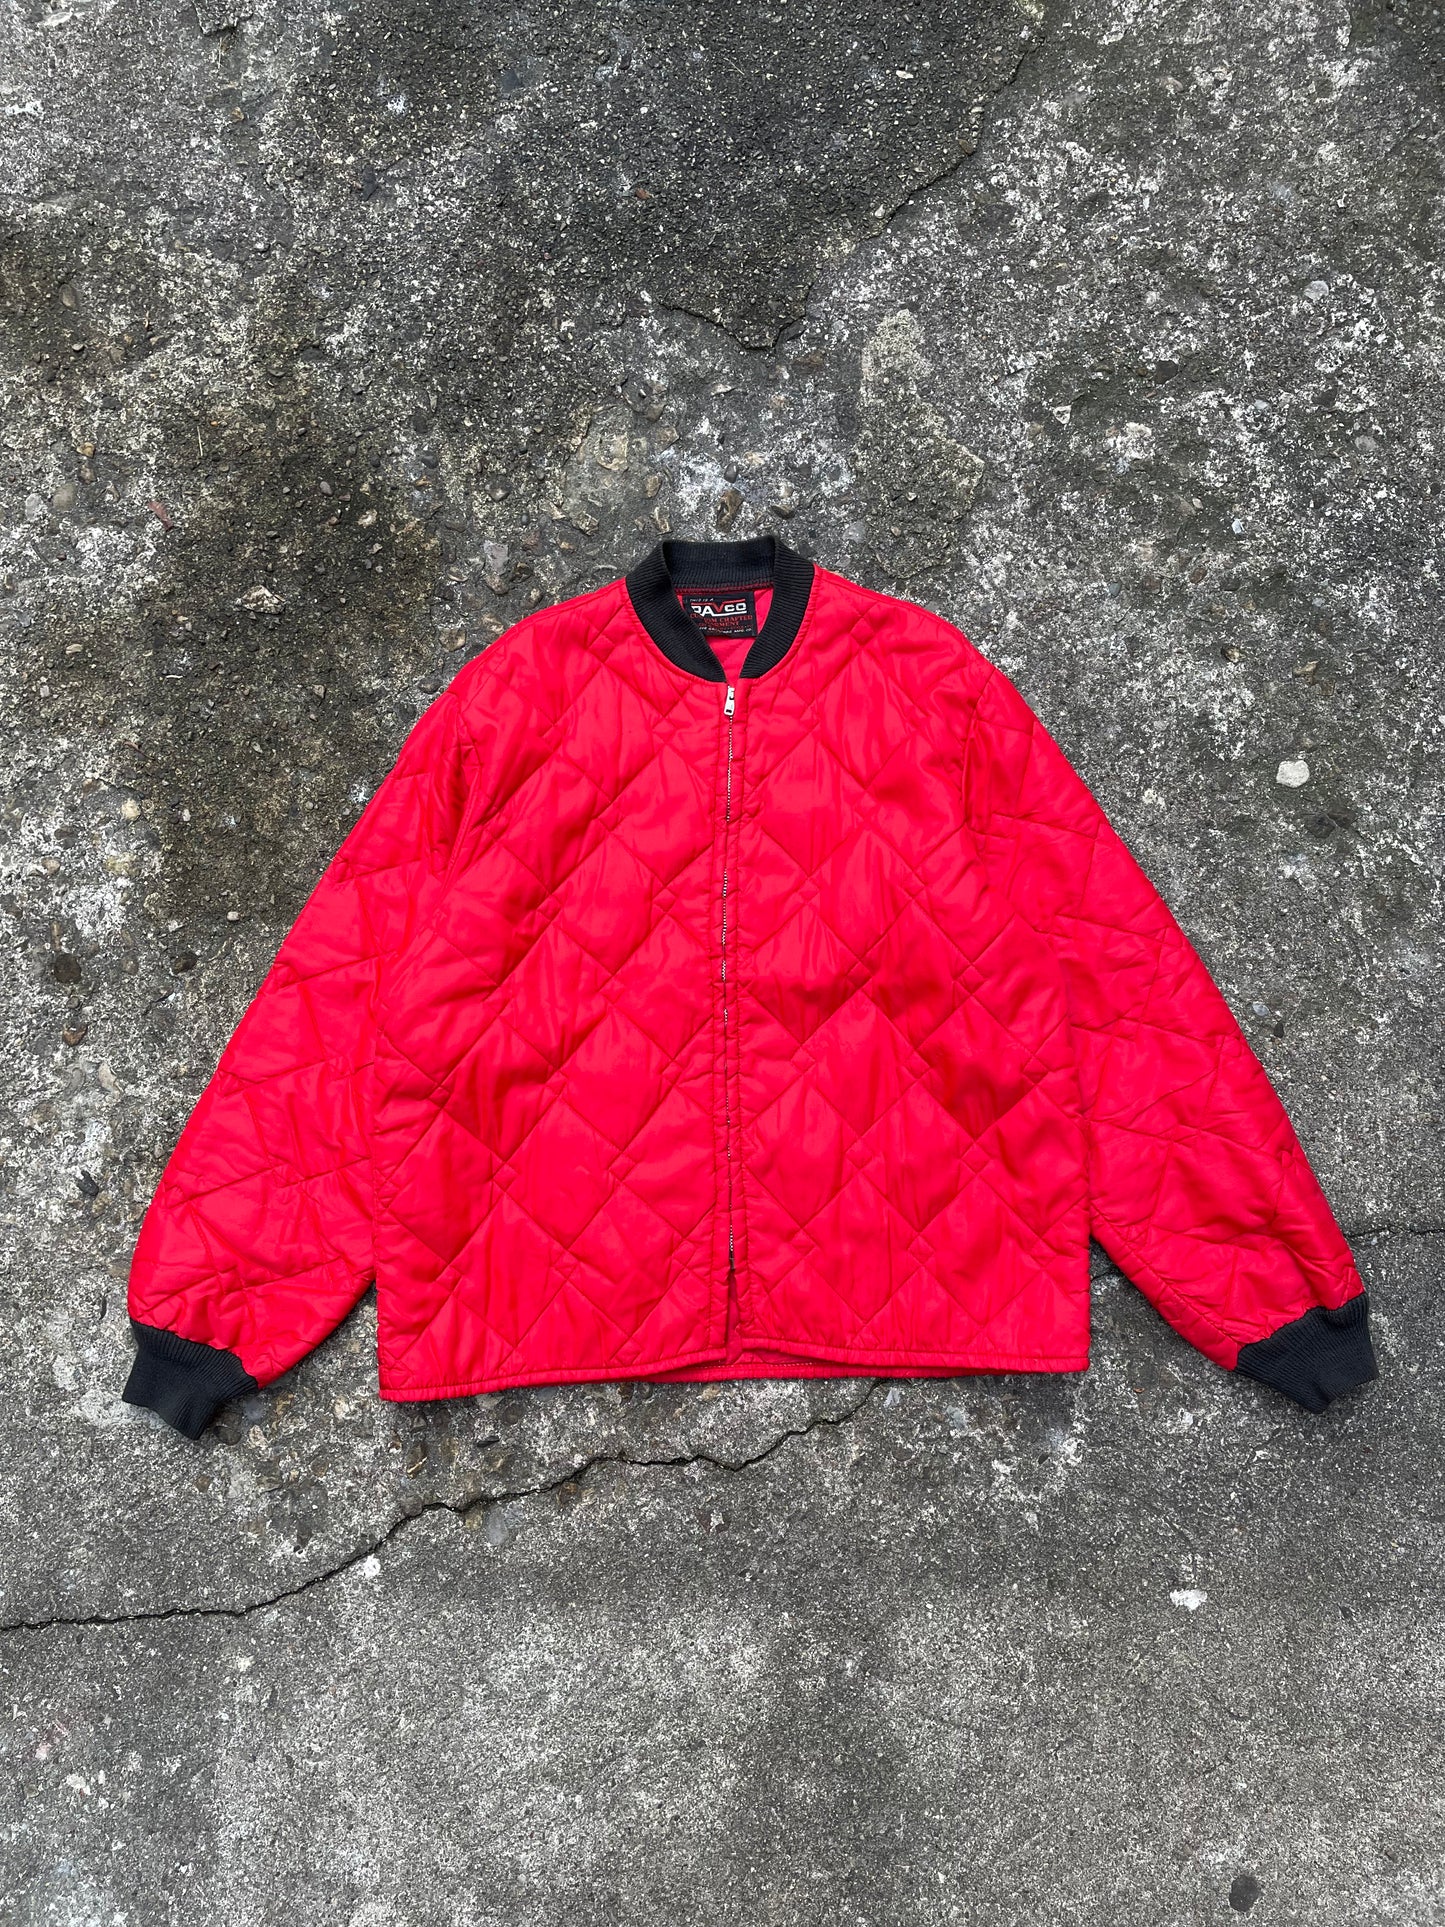 1960’s Davco Red Quilted Insulated Liner Jacket - L